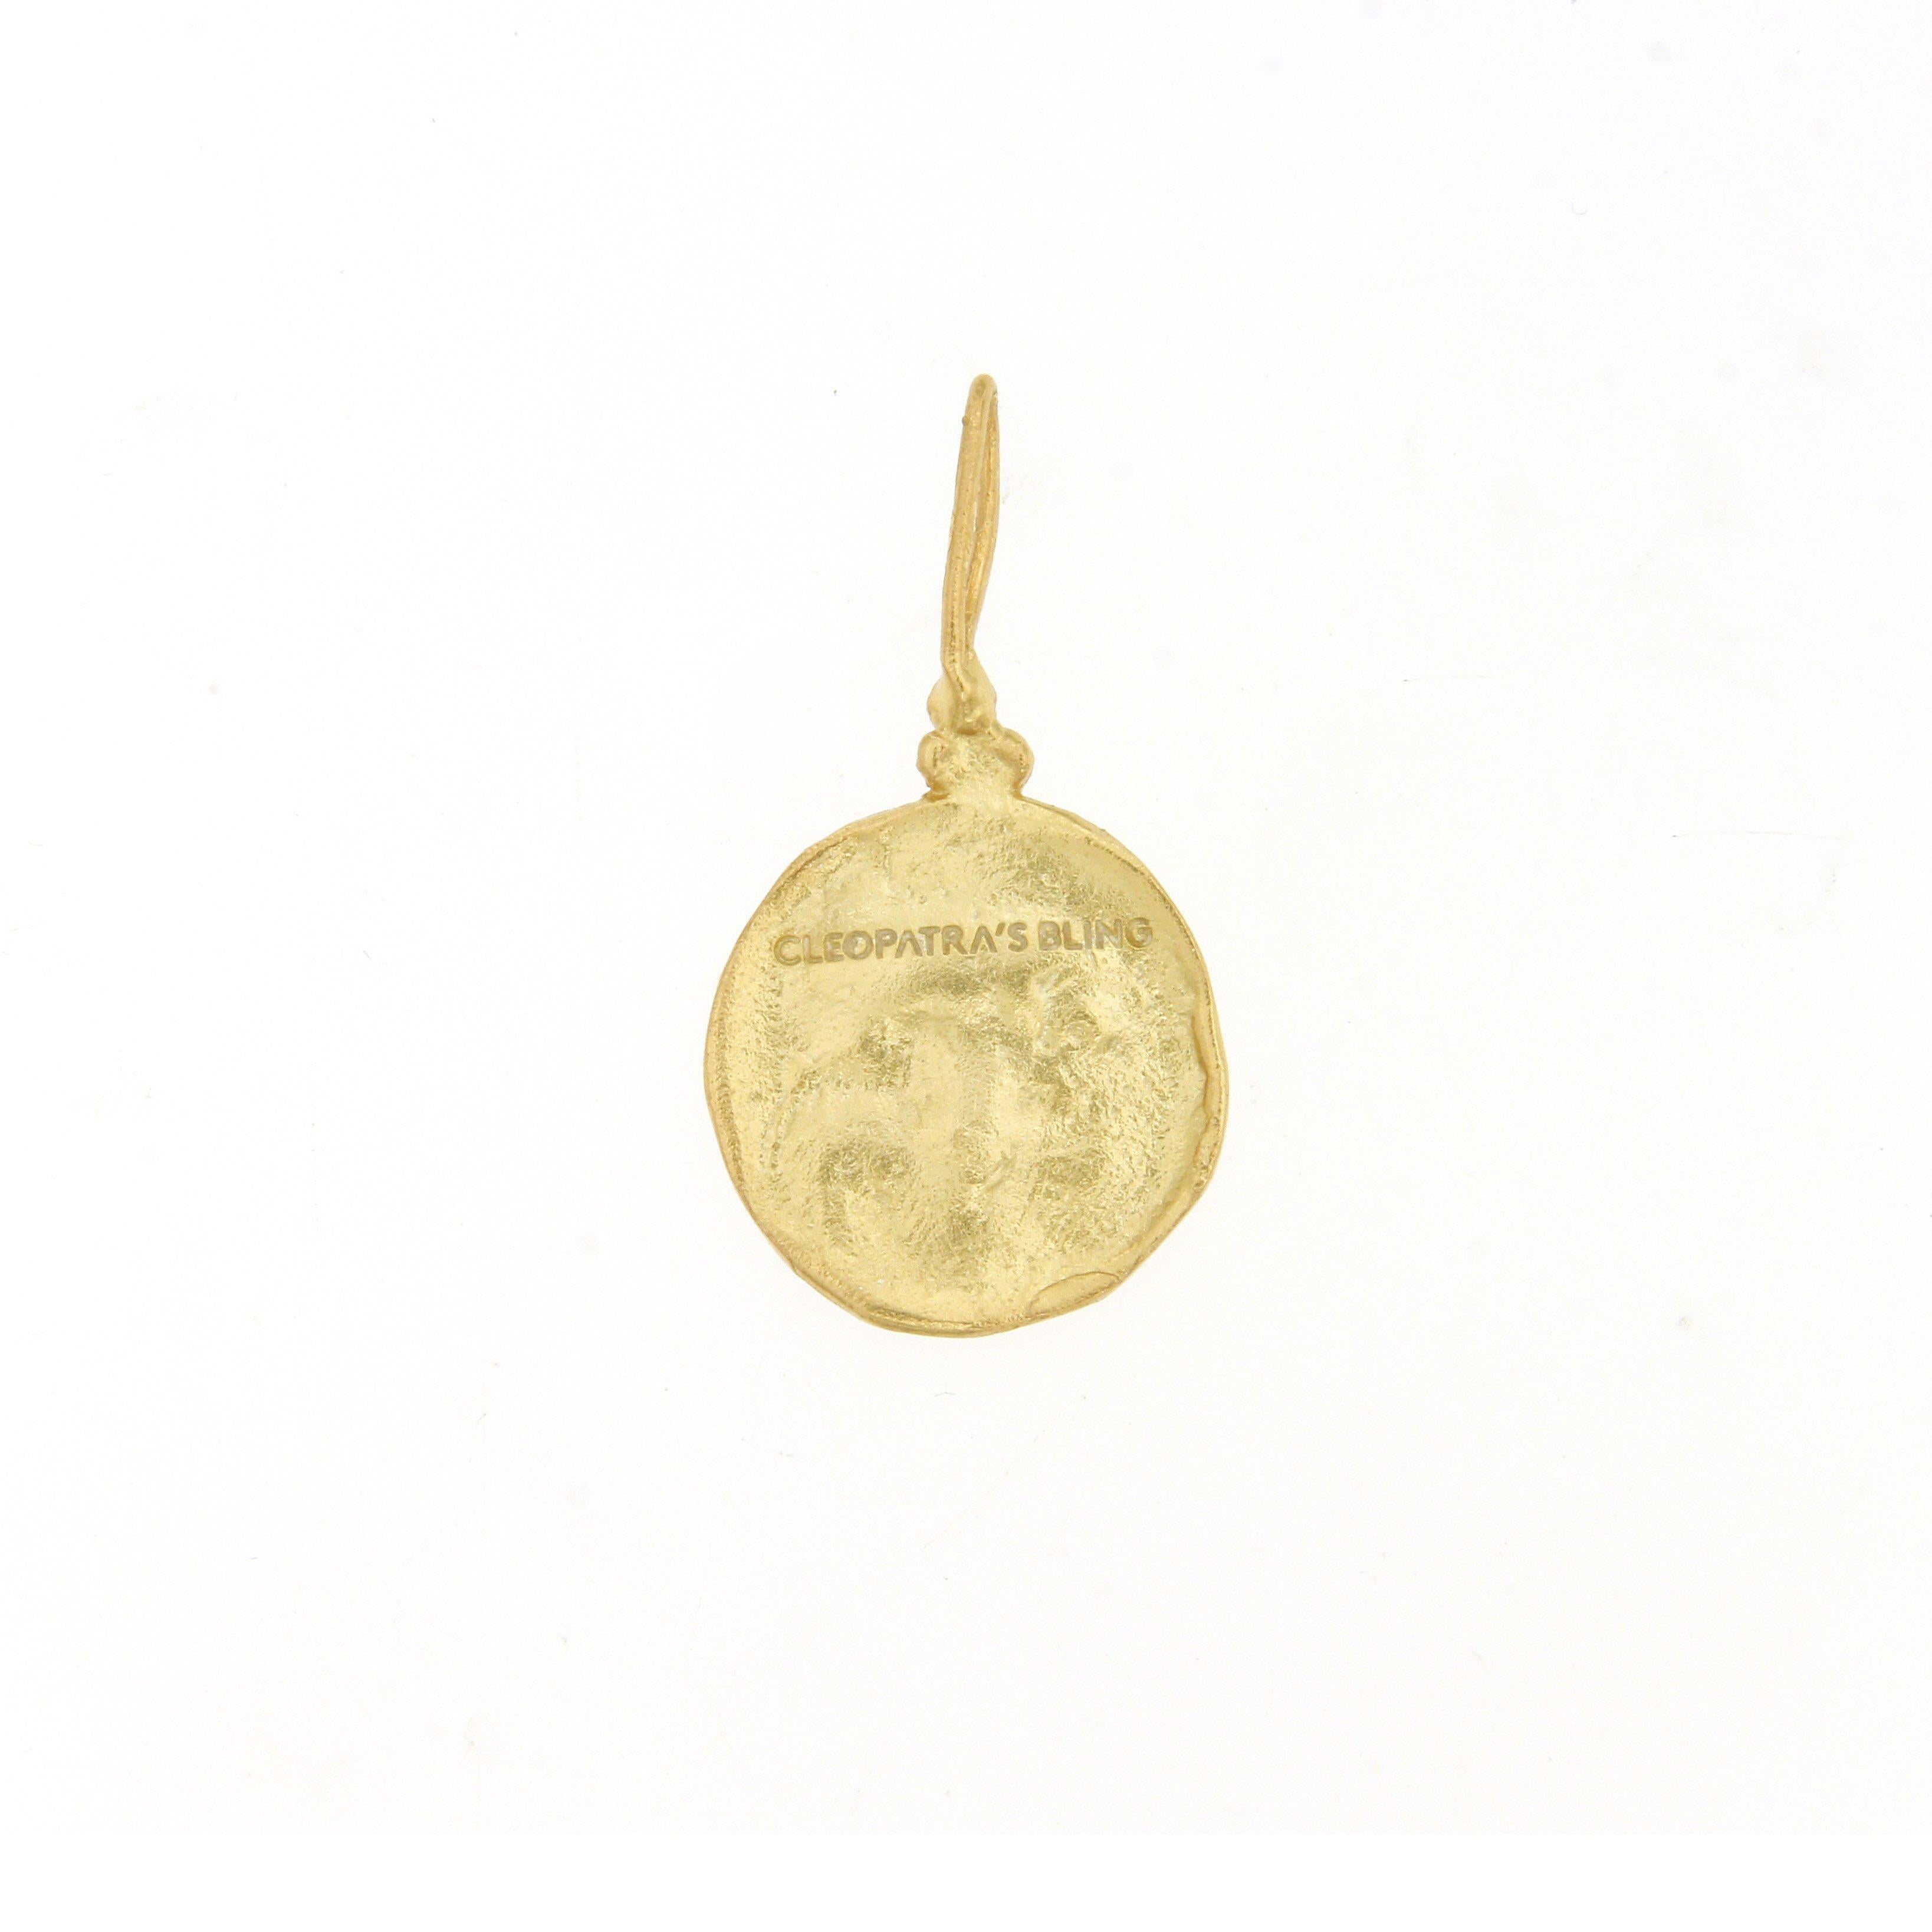 Moon Face Pendant, 18 Karat Yellow Gold
Handcrafted and individually cast in solid yellow gold. Each item is made to order by Olivia and our small team of artisans in Italy. 
The moon has always been a symbol of the woman. We find this mysterious